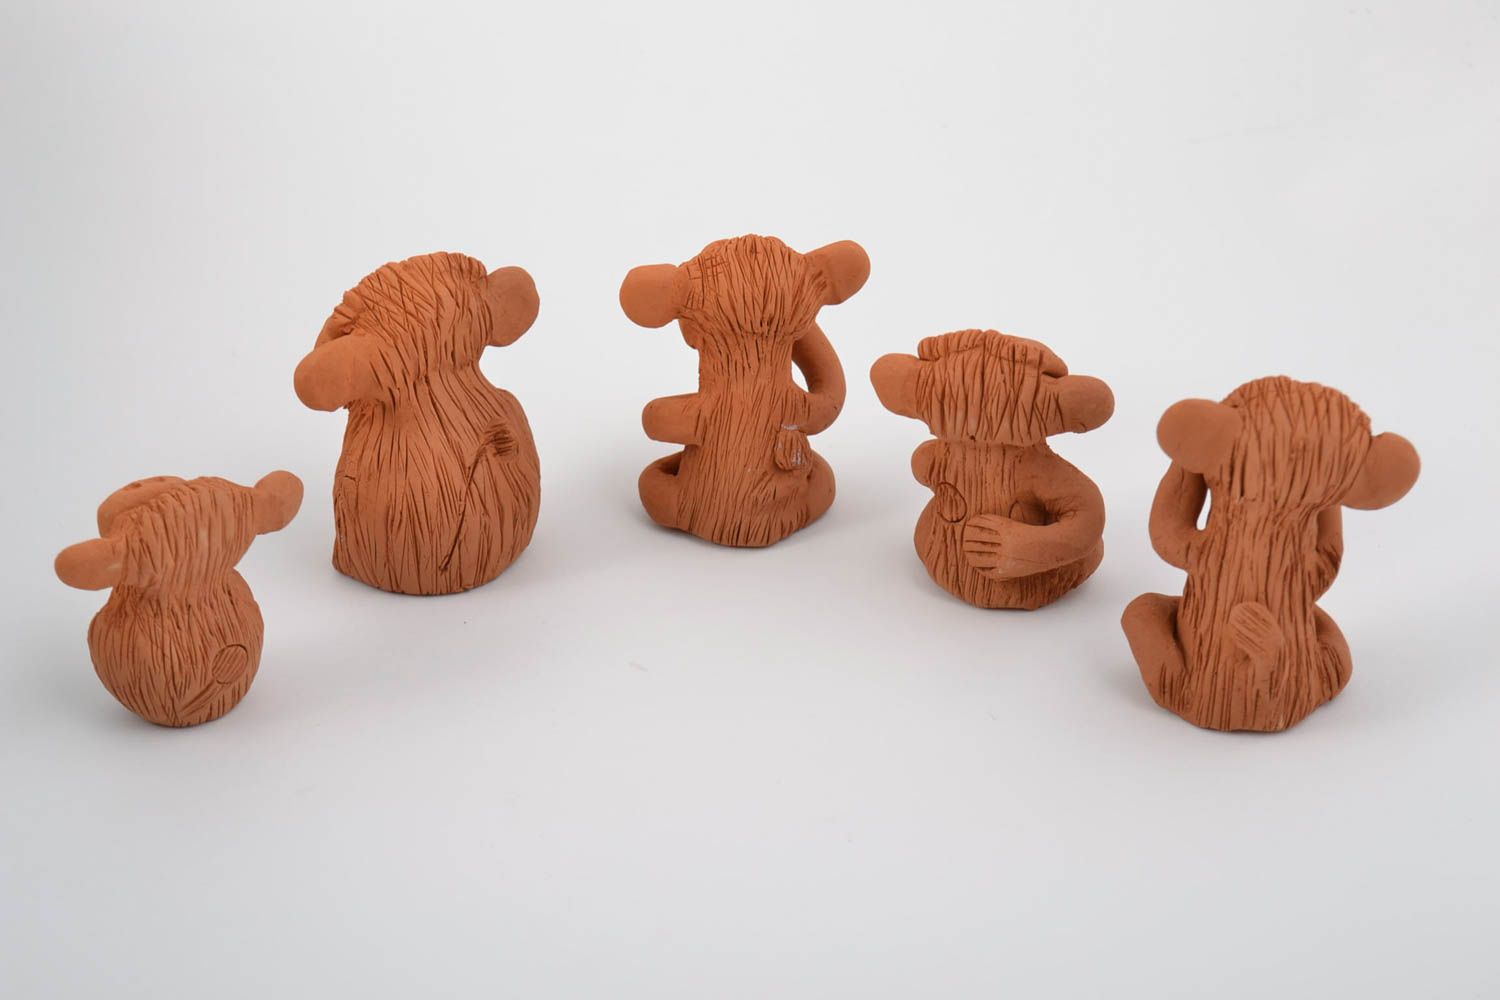 Statuettes made of clay monkeys set of 5 pieces ceramic funny handmade photo 3